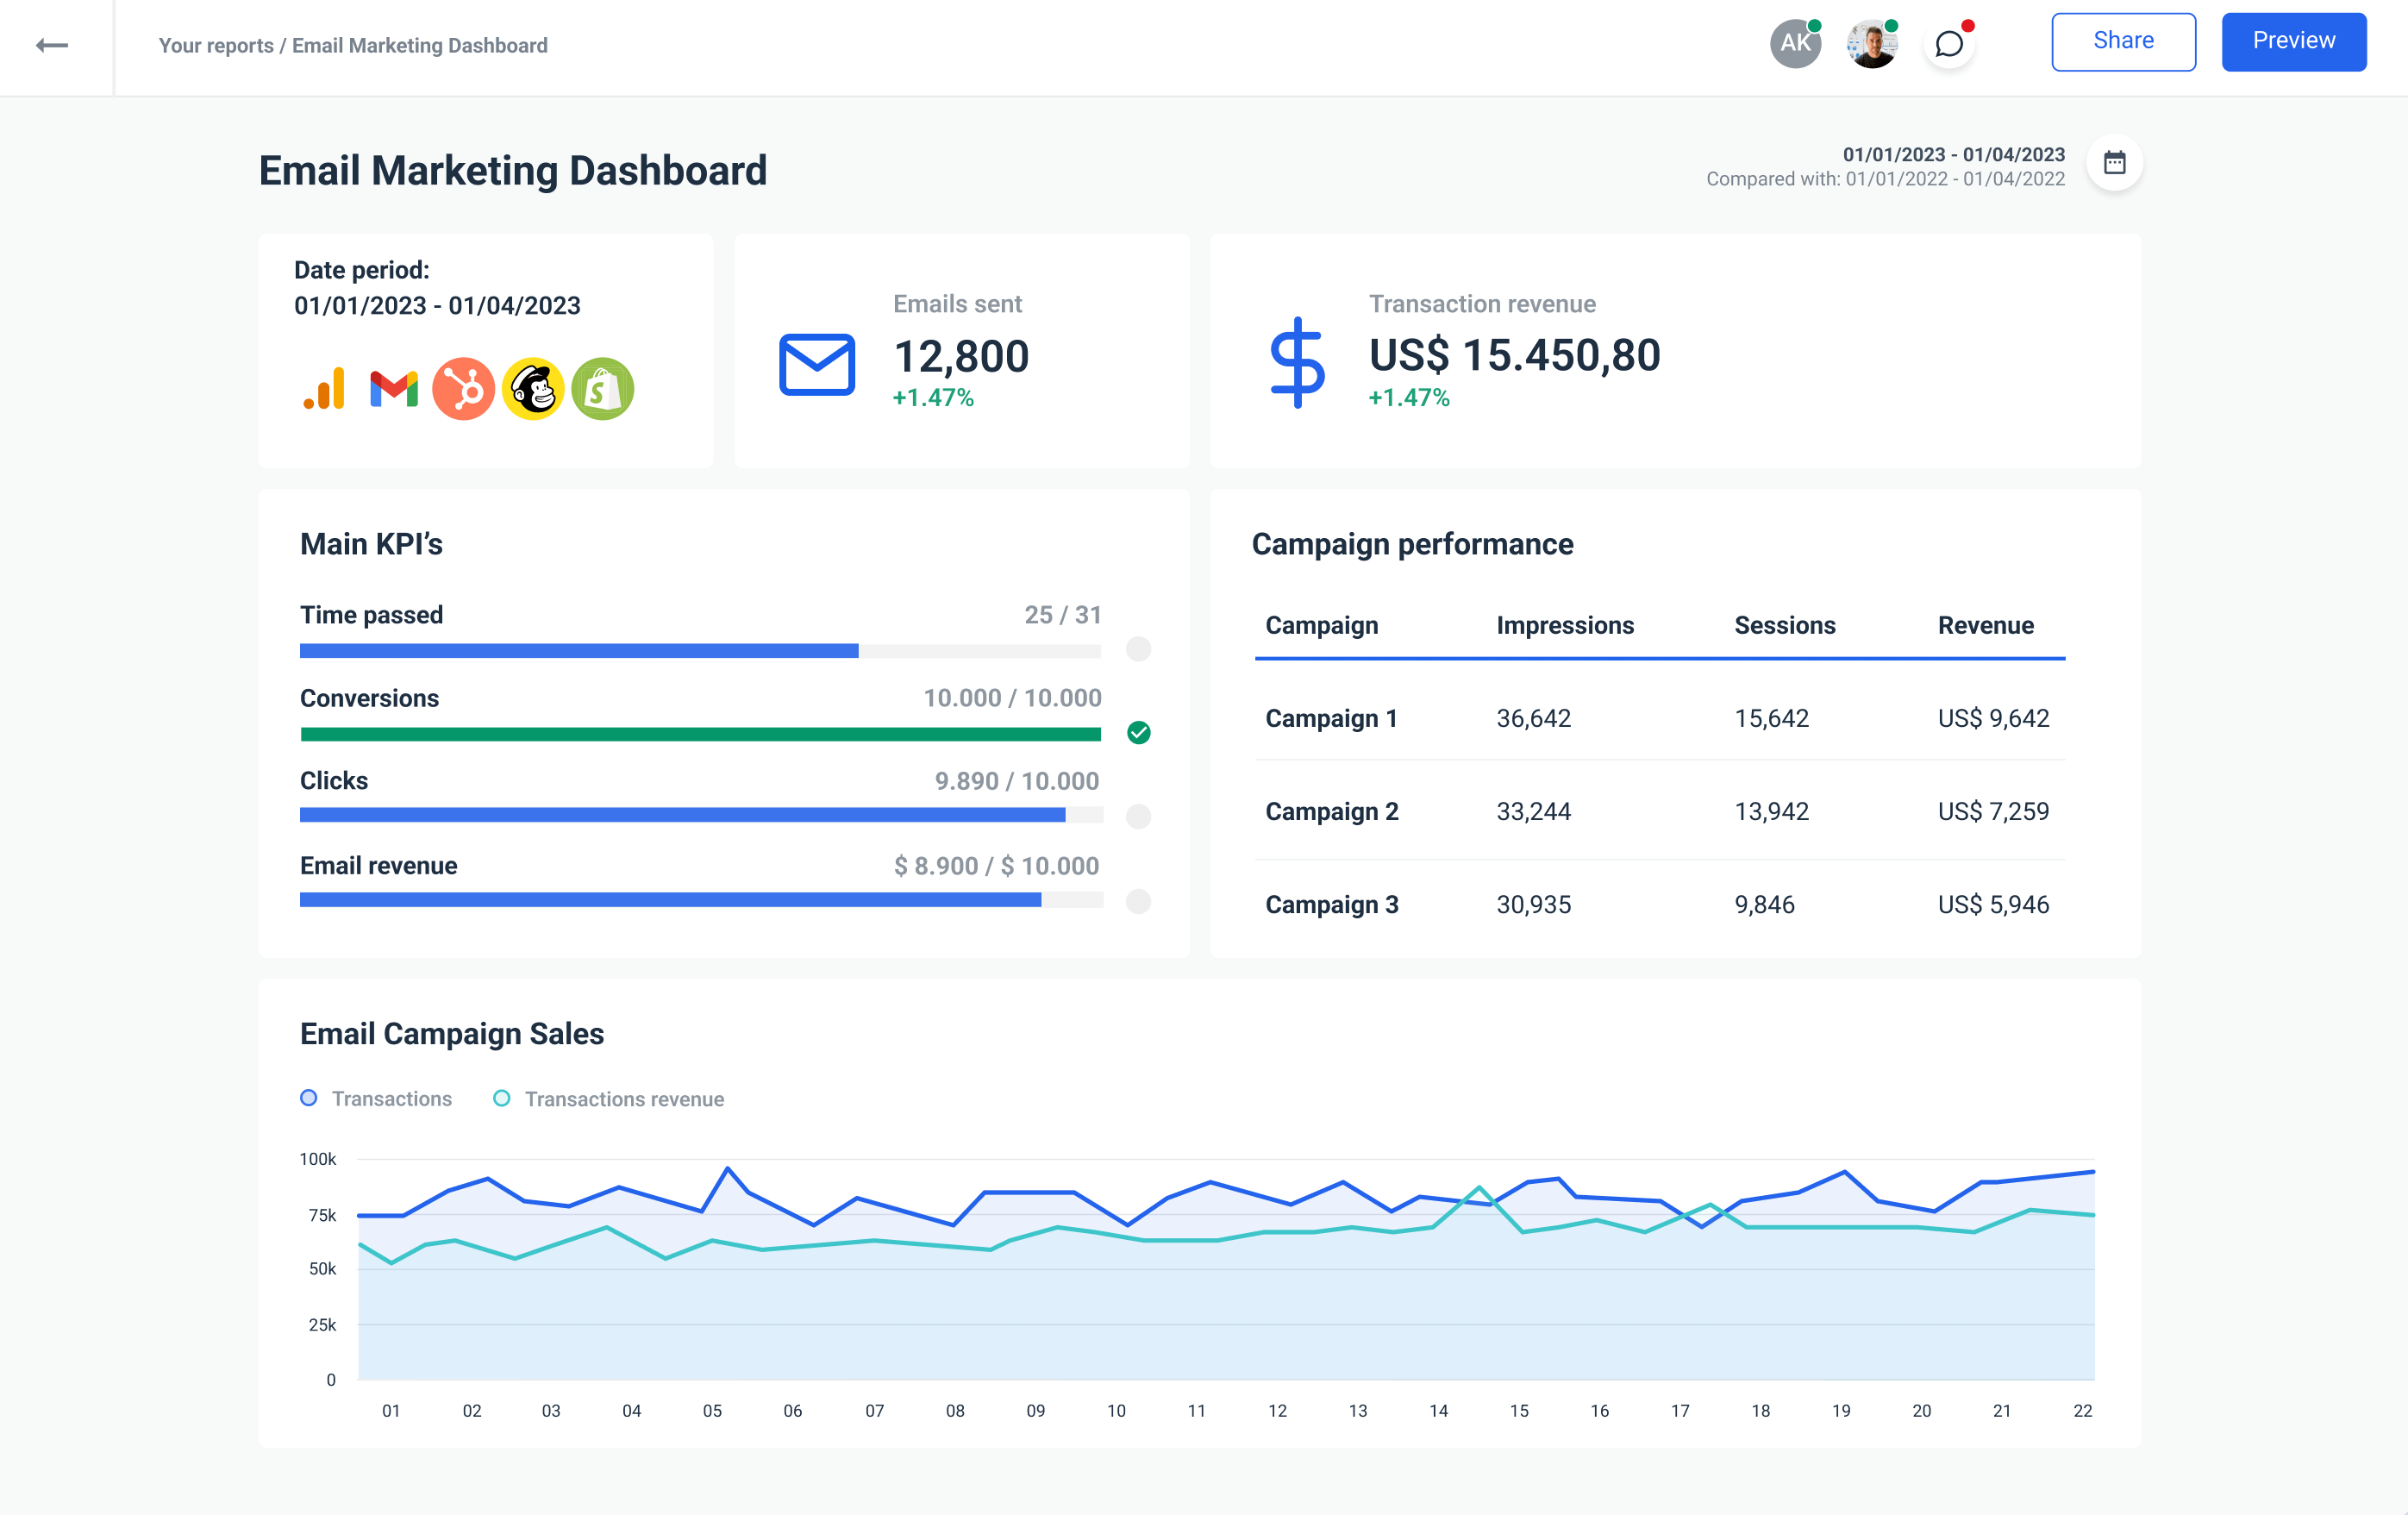 Email marketing dashboard from Whatagraph